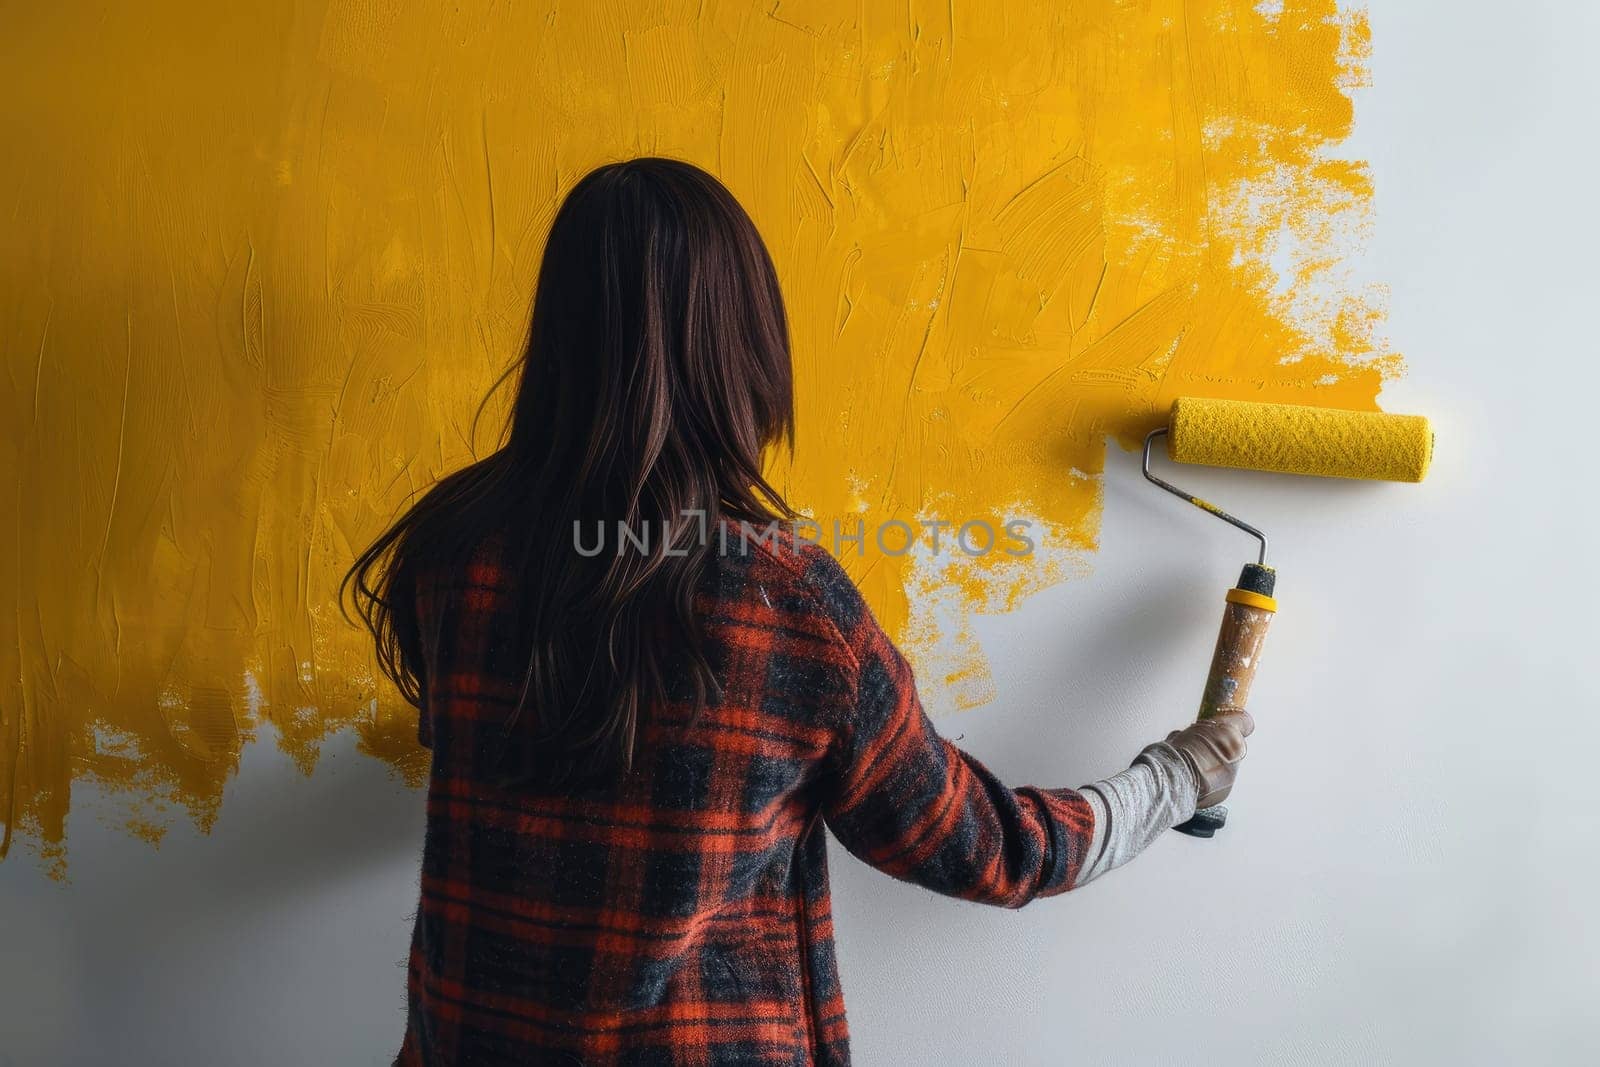 The girl paints with bright yellow paint on the surface of the wall. by Yurich32